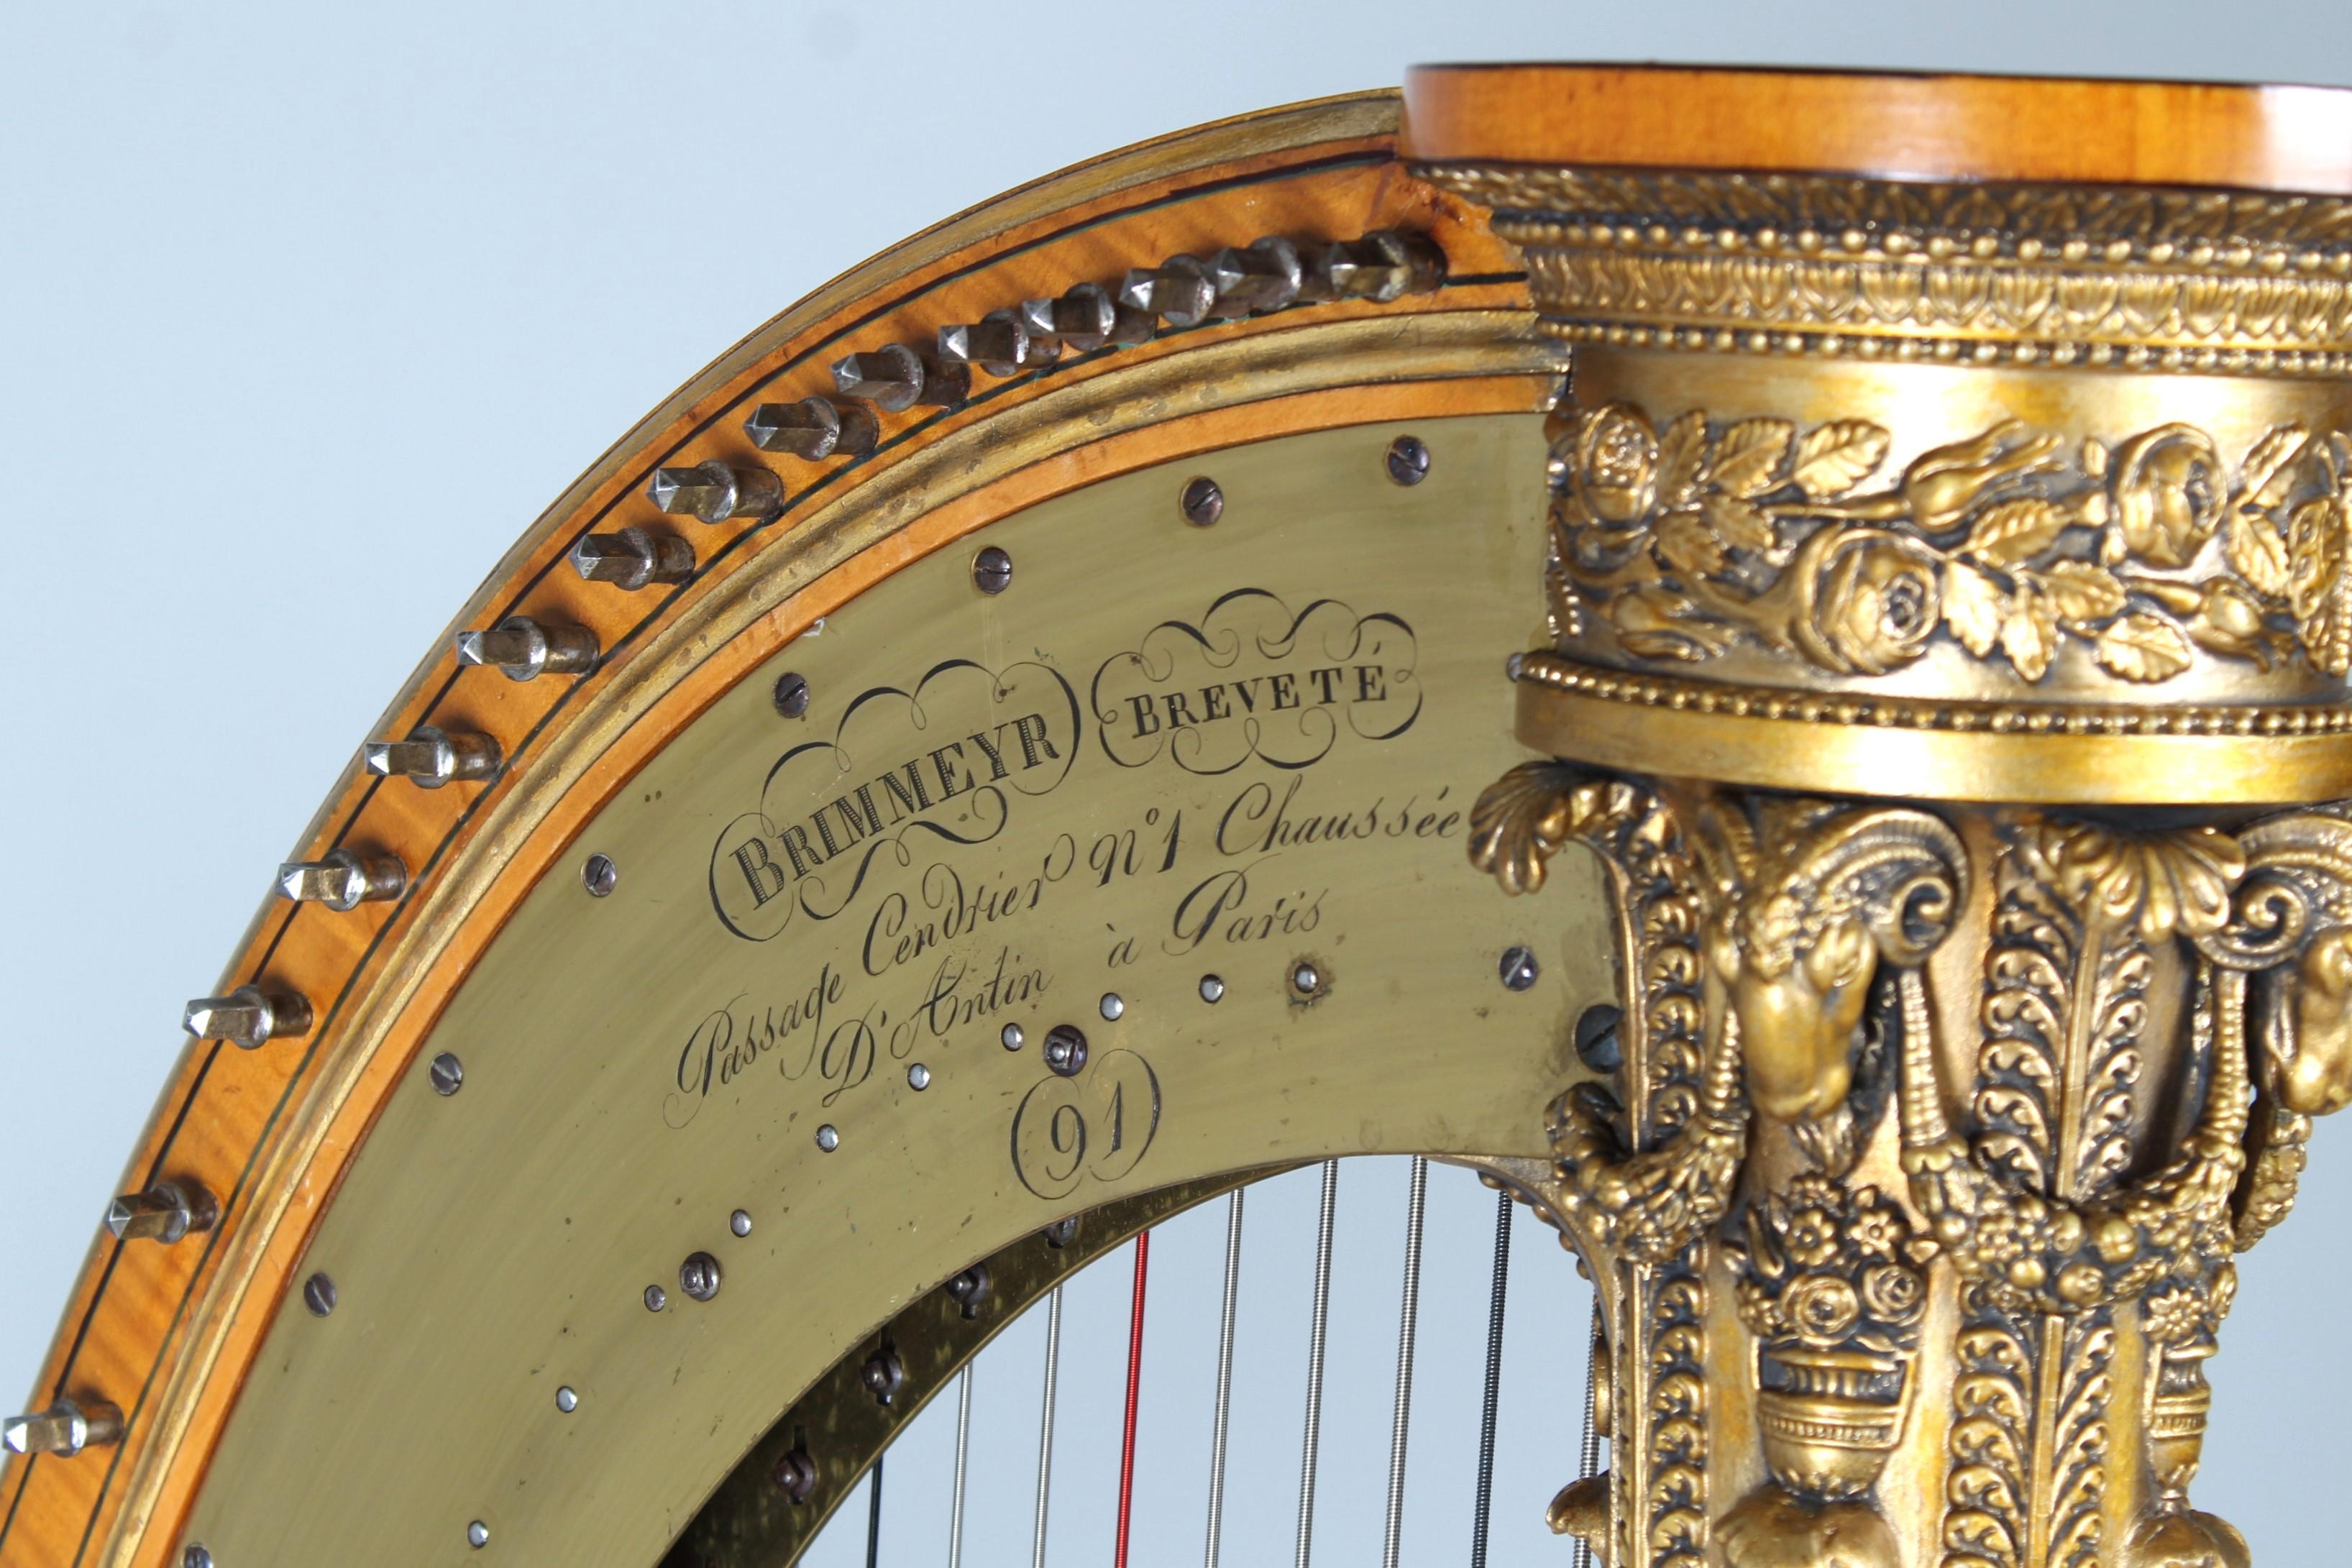 Antique harp by Brimmeyr

Workshop Brimmeyr à Paris
wood, stucco
around 1826

Dimensions: H x W x D: 167 x 47 x 80 cm

Description:
Beautiful and extremely elegant pedal harp with 43 strings from the workshop of the famous harp maker Brimmeyr in